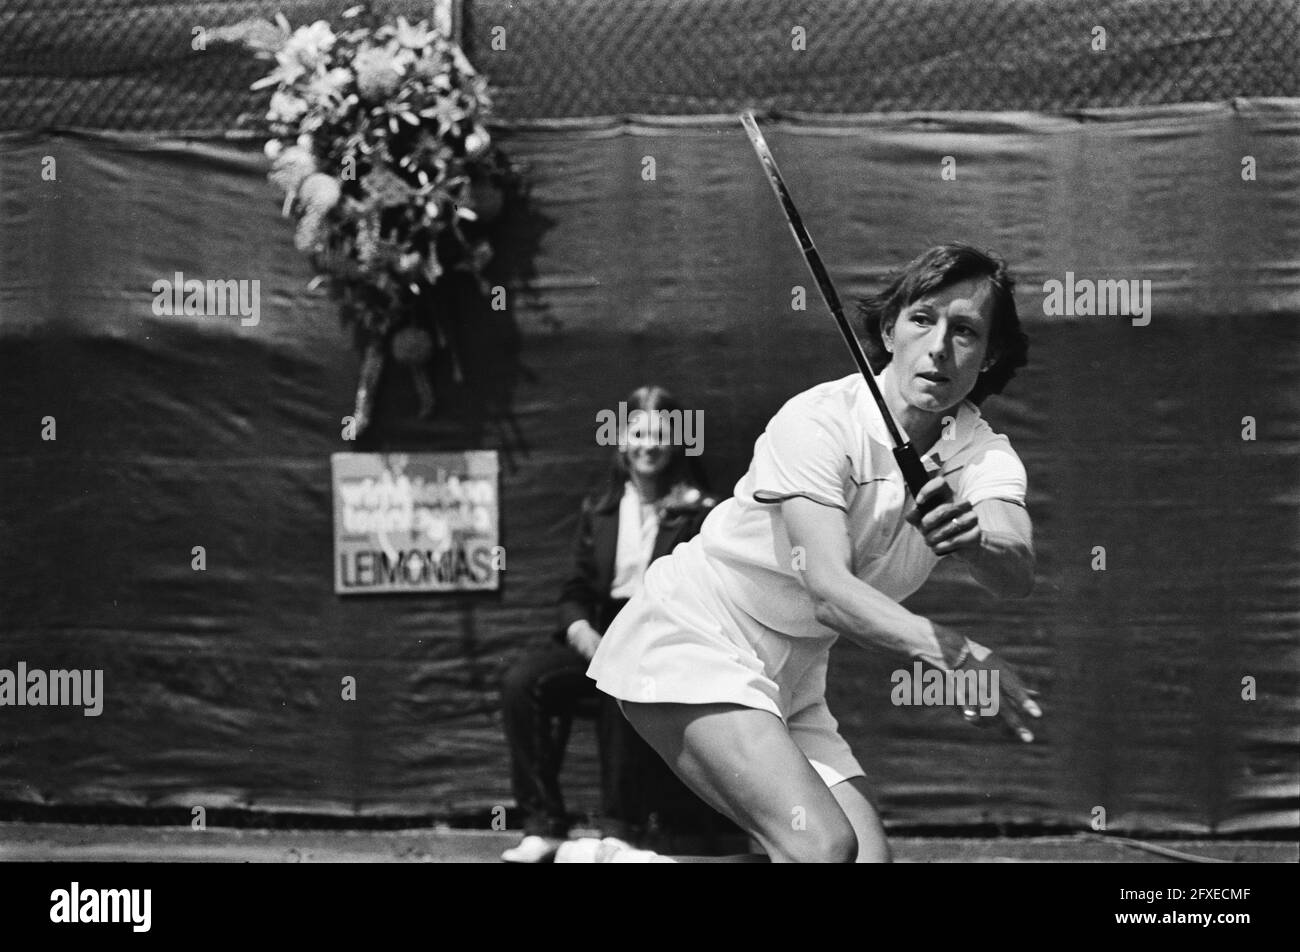 Tennis: Netherlands against United States in The Hague, Navratilova in action, July 6, 1980, tennis, The Netherlands, 20th century press agency photo, news to remember, documentary, historic photography 1945-1990, visual stories, human history of the Twentieth Century, capturing moments in time Stock Photo